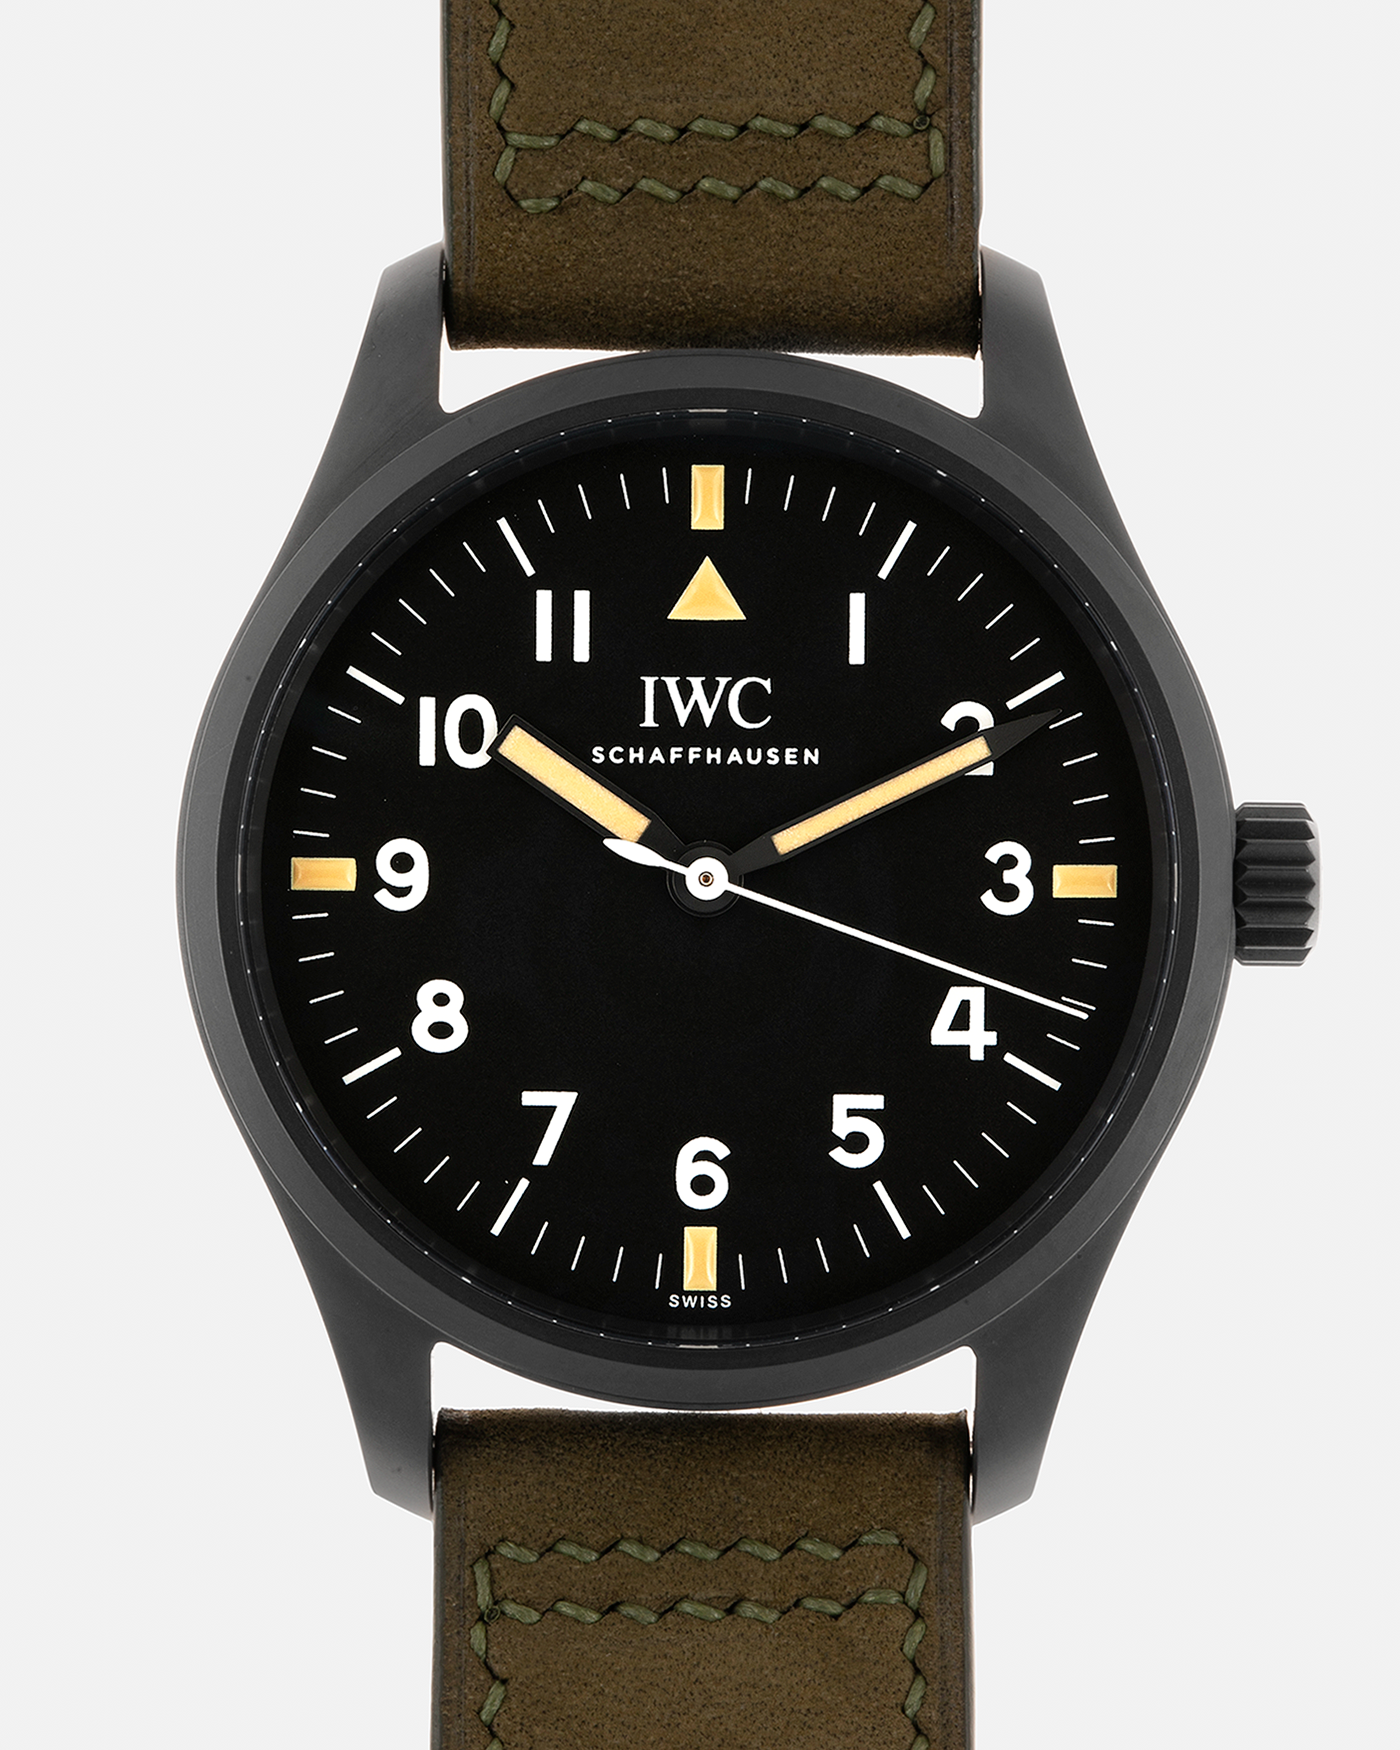 Brand: IWC Year: 2019 Model: Mark XVIII ‘Hodinkee’, Limited to 500 pieces Reference Number: IW324801 Material: Ceratanium Movement: IWC Cal. 35100, Self-Winding Case Dimensions: 39mm x 10.6mm Lug Width: 20mm Strap: IWC Olive Green Calf Leather Strap with Signed Ceratanium Tang Buckle, with extra IWC Embossed Olive Green Calfskin Strap